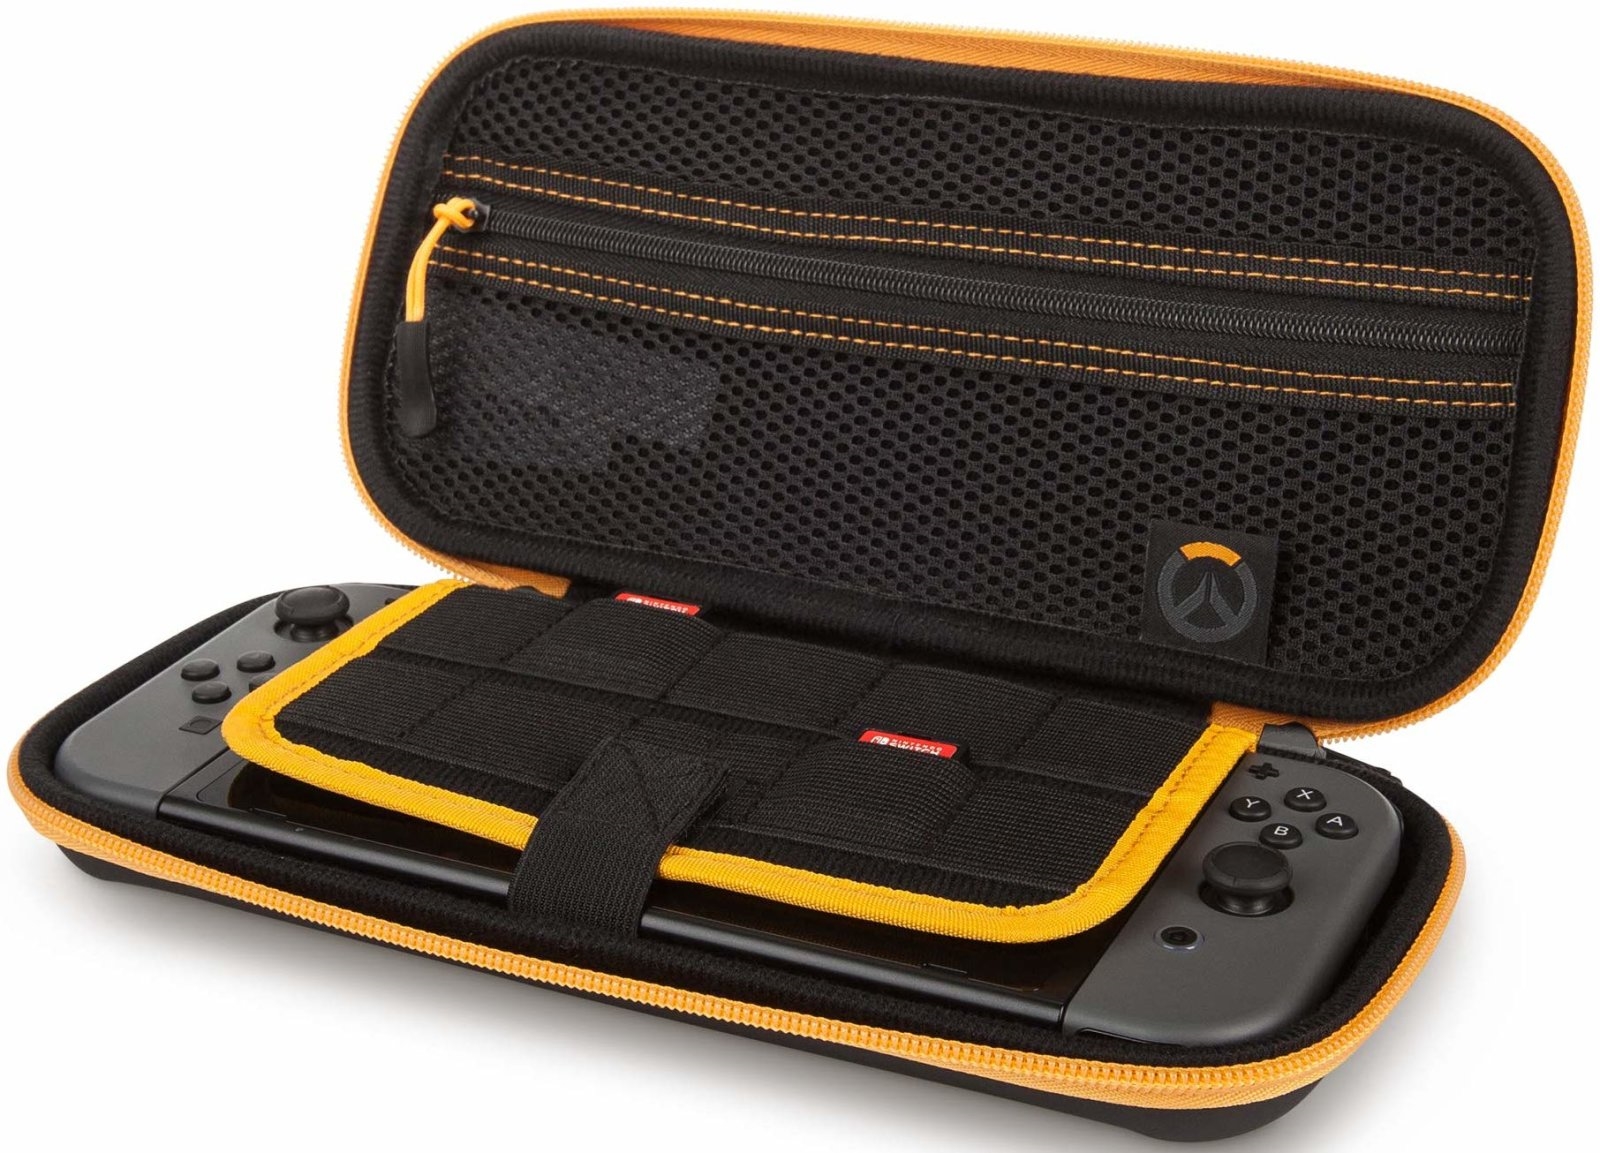 'Overwatch' Switch case raises hopes for a port | DeviceDaily.com